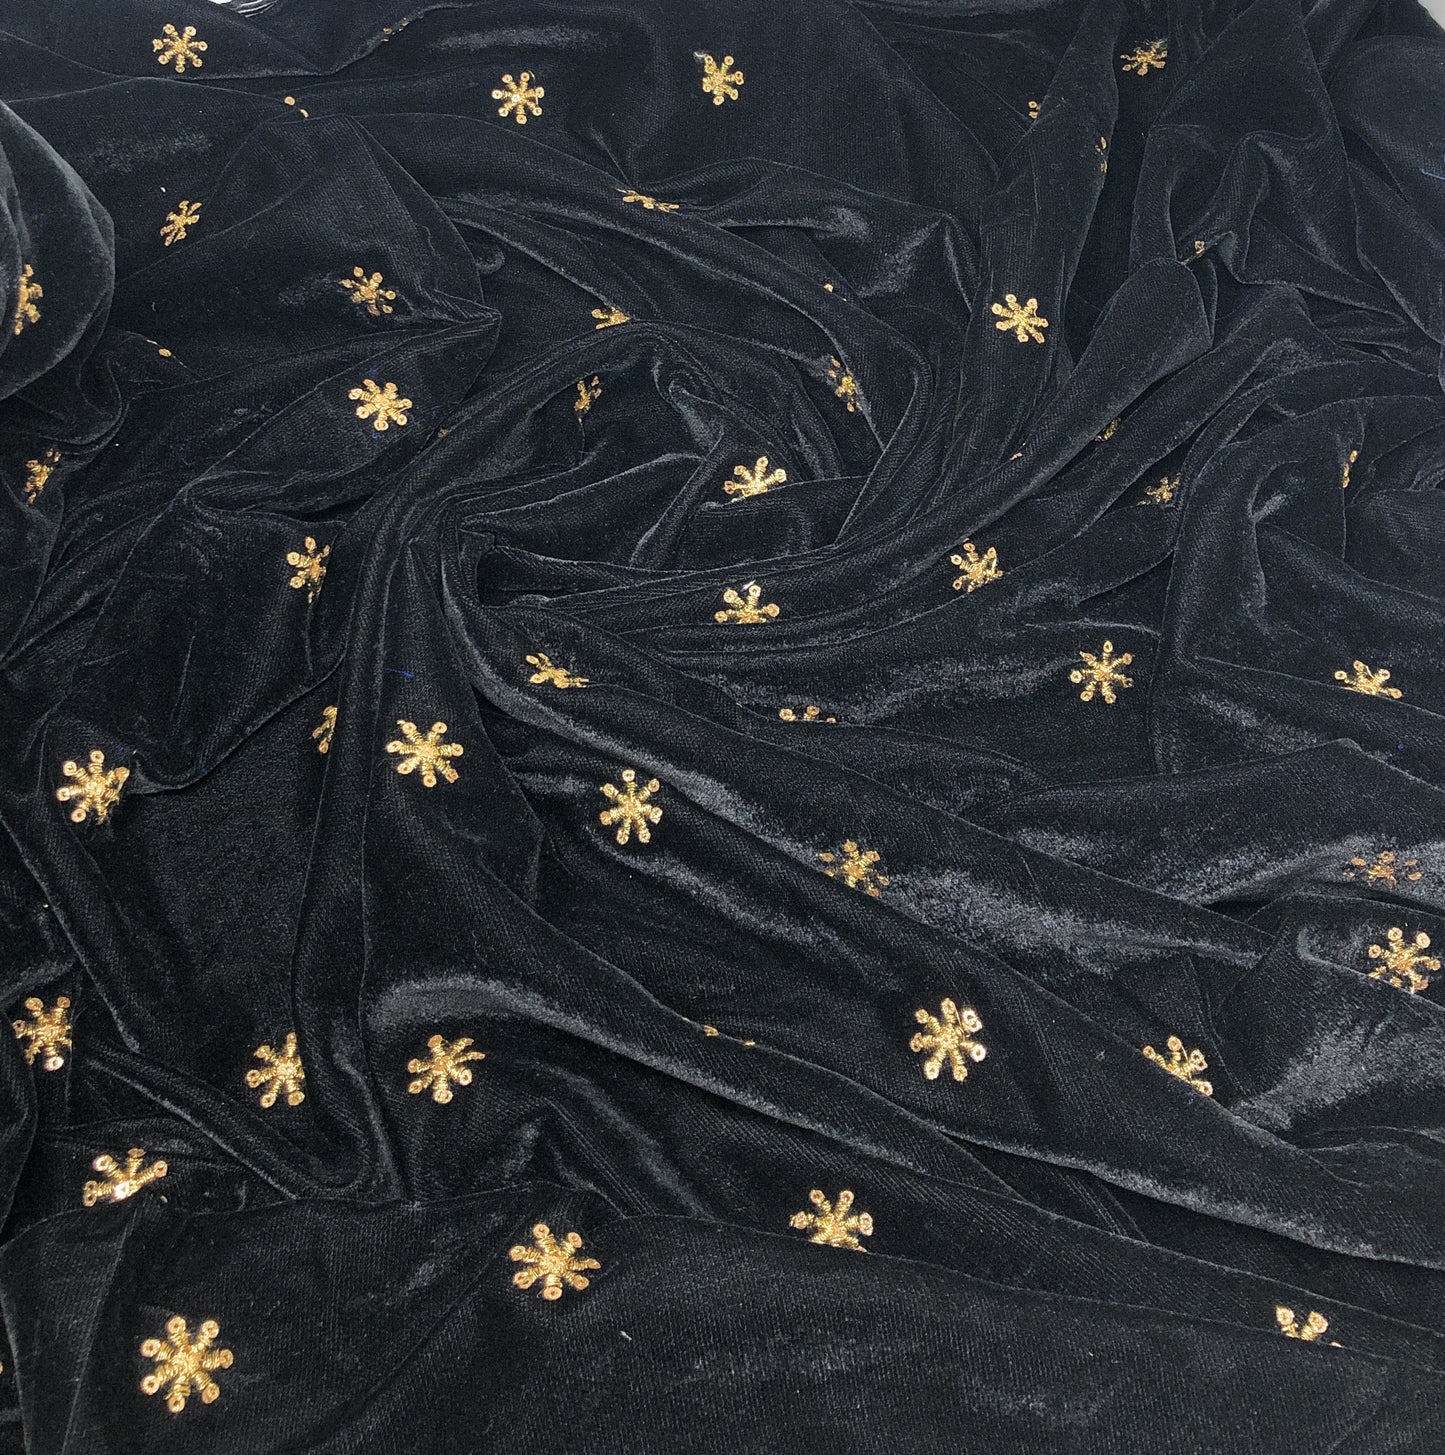 Black Velvet Fabric, Gold Sequin Embroidery Material by meter